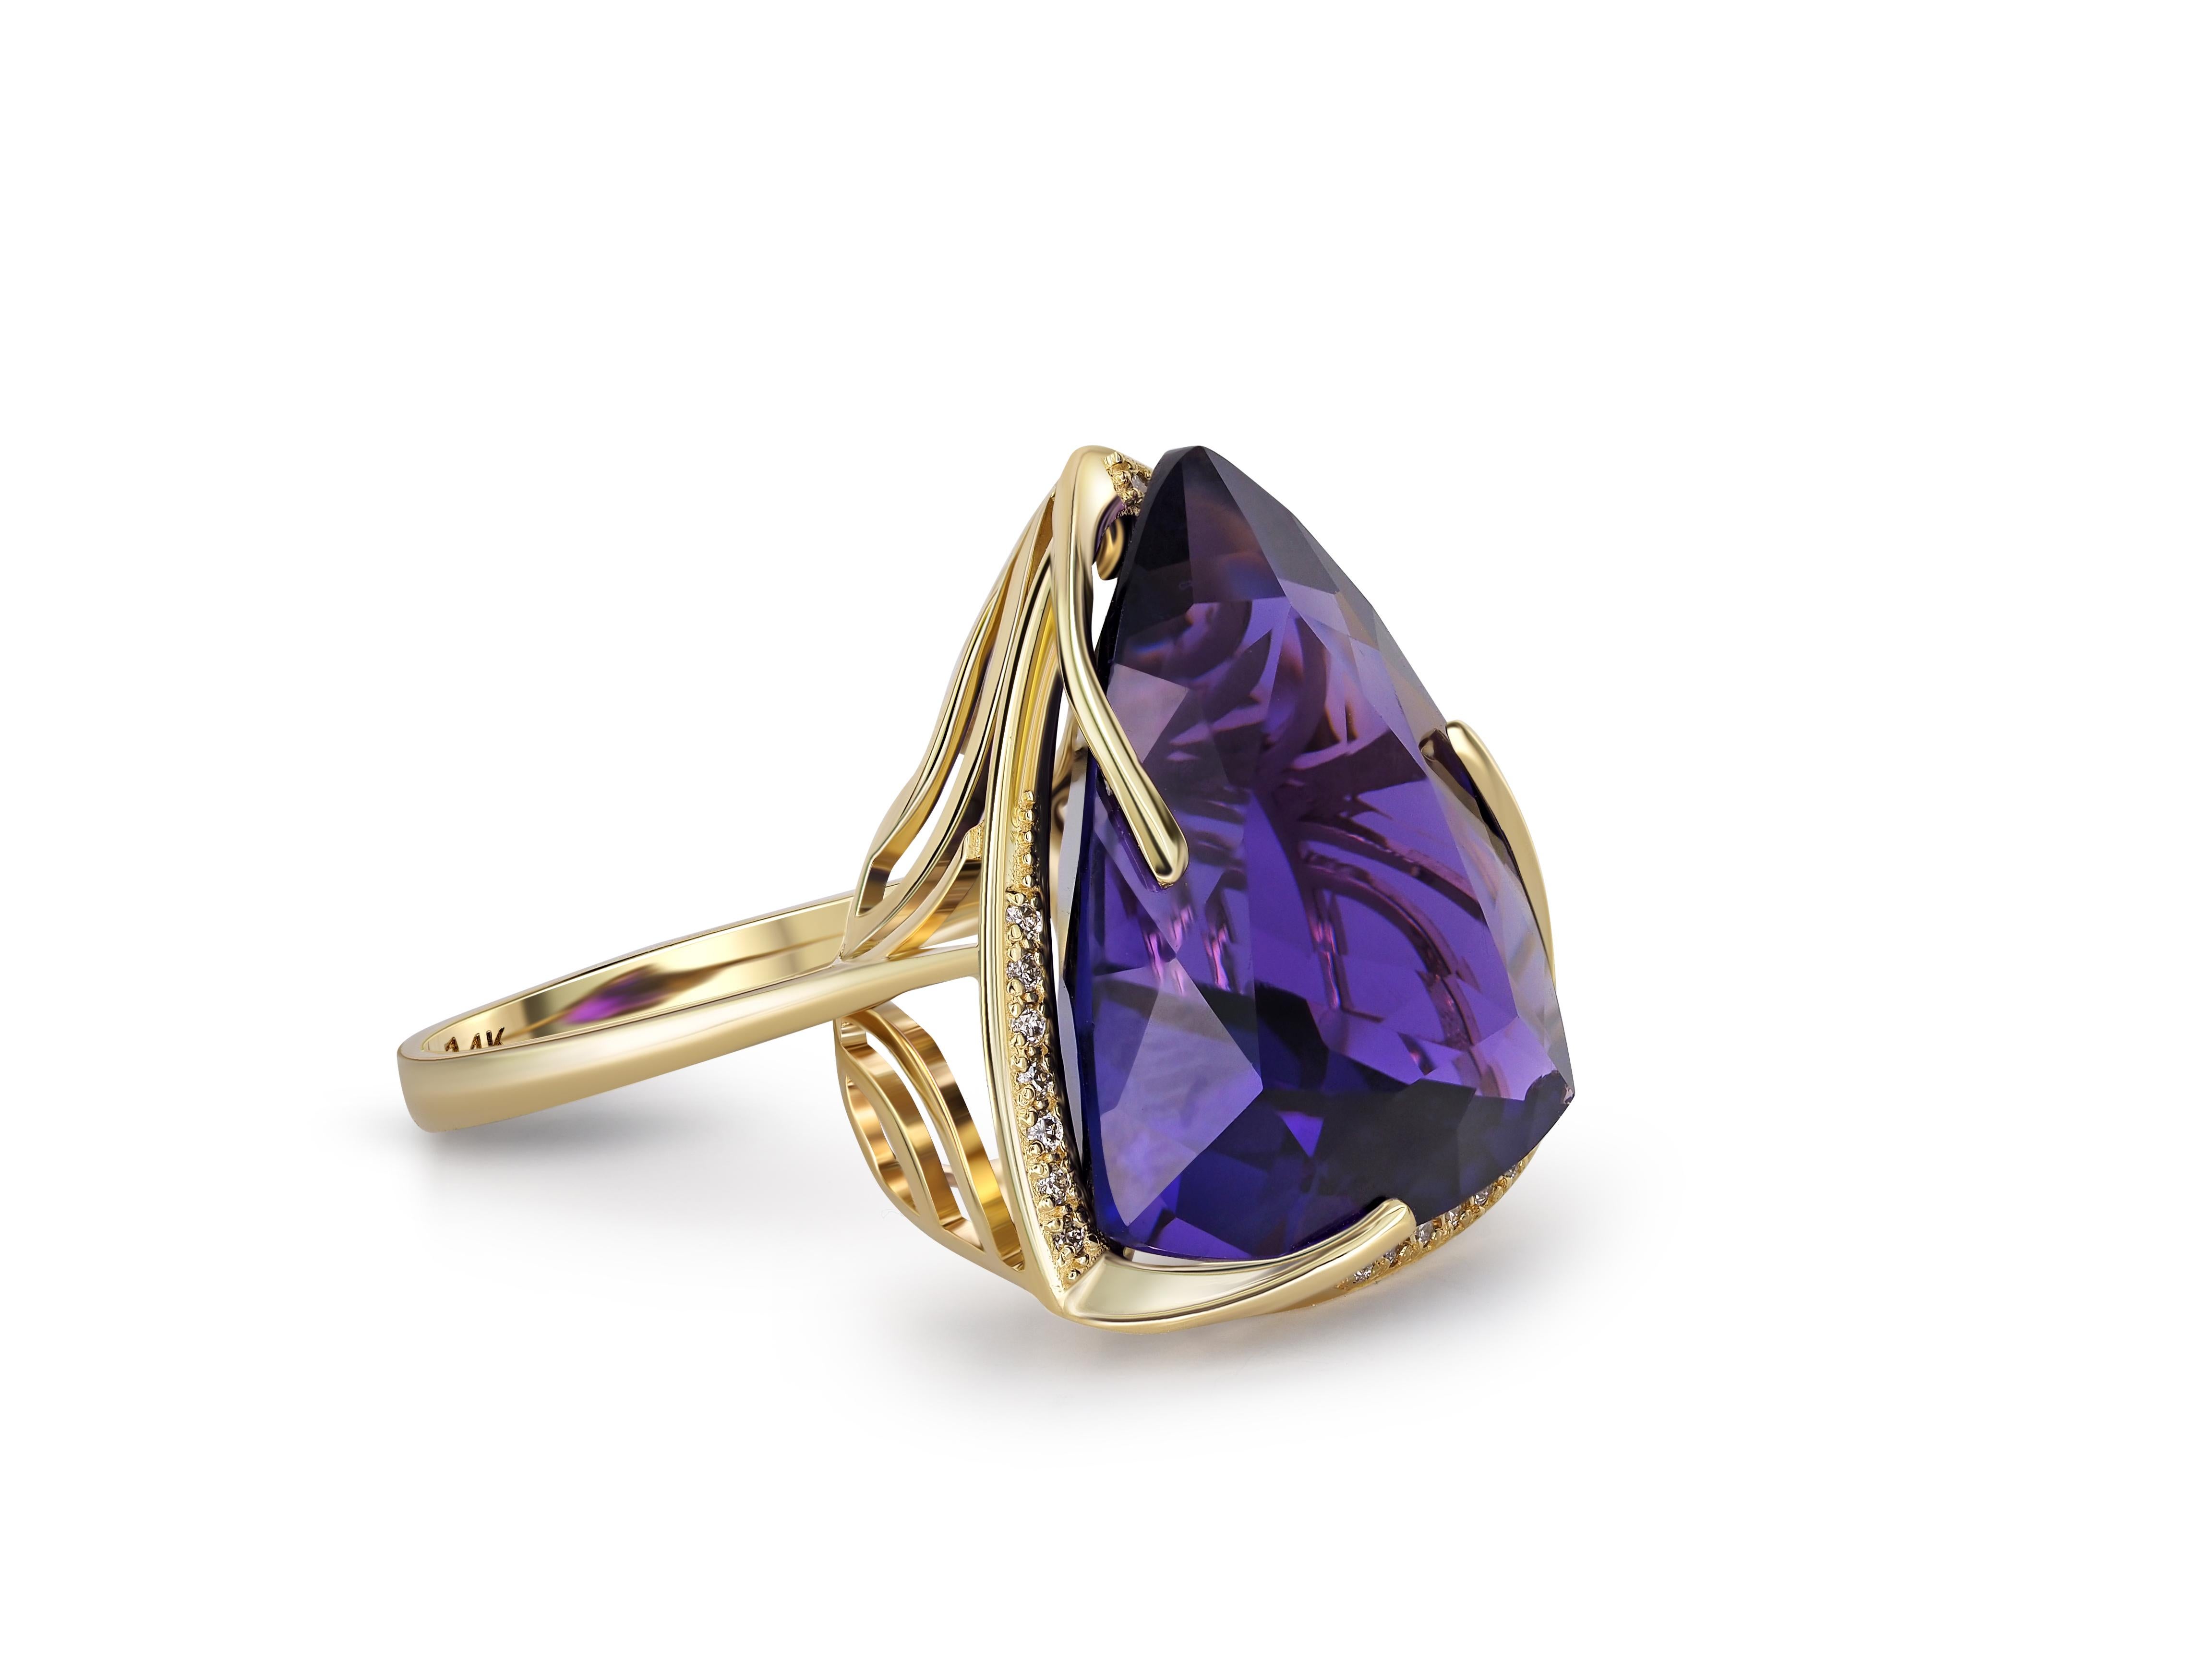 Women's 14 Karat Gold Ring with Amethyst and Diamonds, Amethyst Cocktail Ring